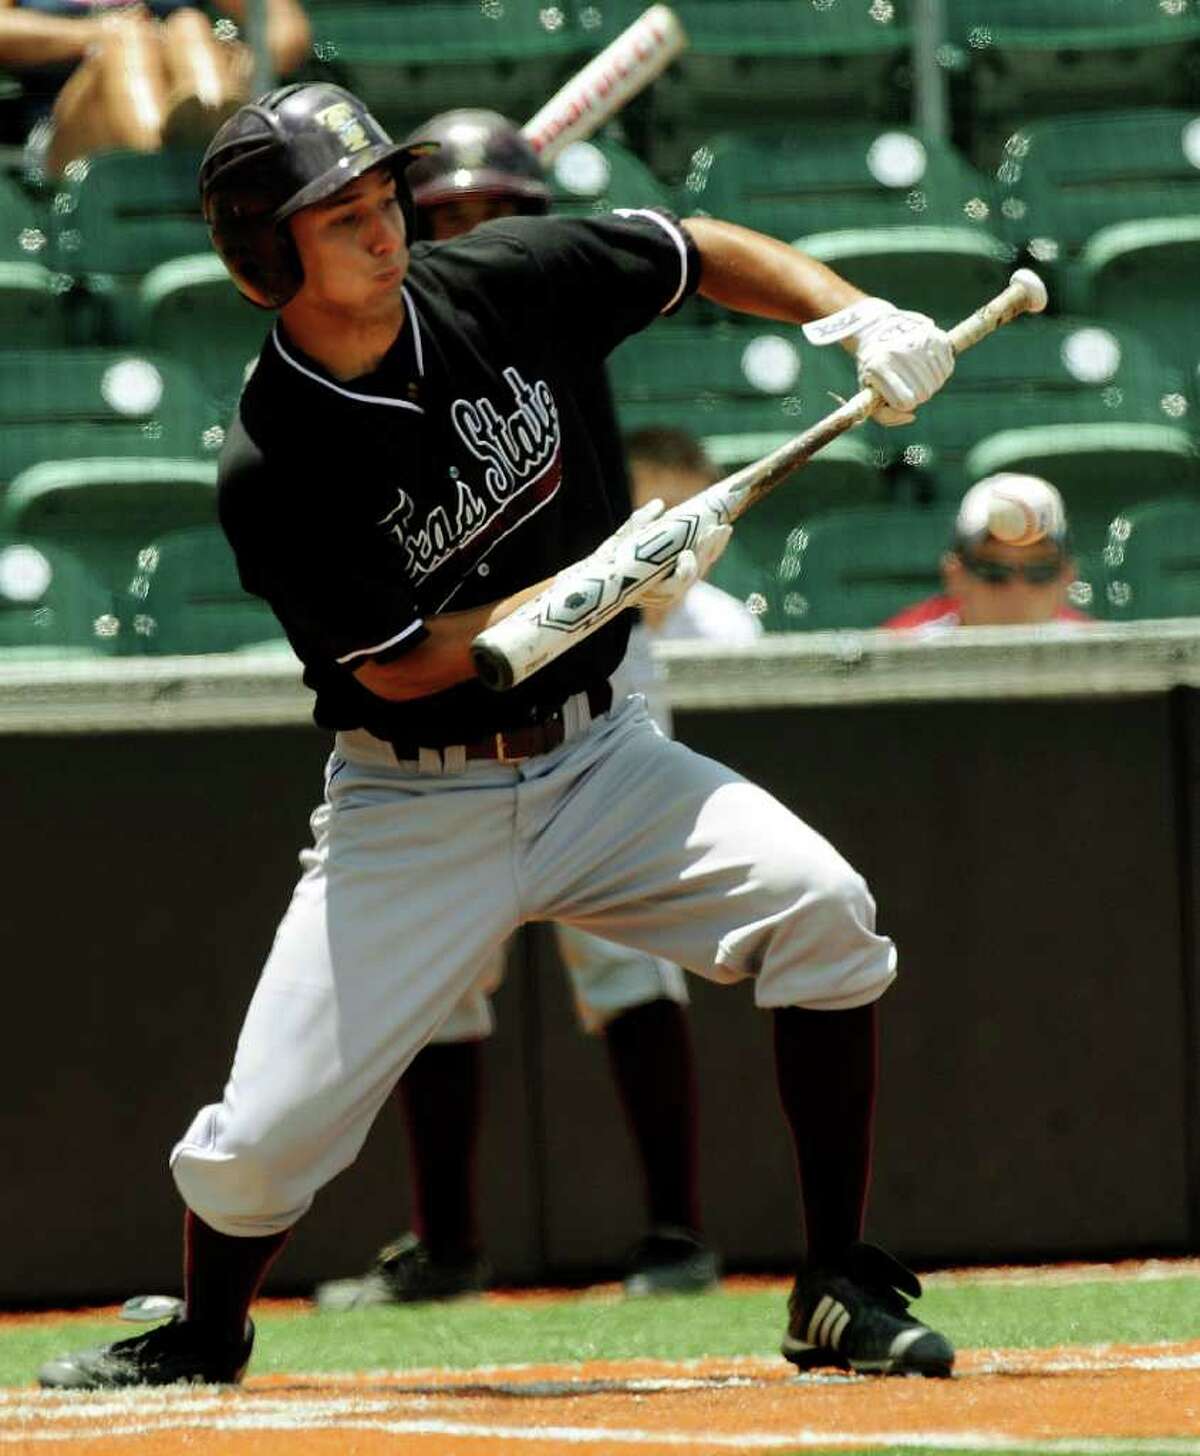 Christian Gallegos of Texas State bunts during NCAA Baseball Austin Regional action against Princeton on Saturday, June 4, 2011. Gallegos reached first on the play and was able to move a runner from second to third base. BILLY CALZADA / gcalzada@express-news.net